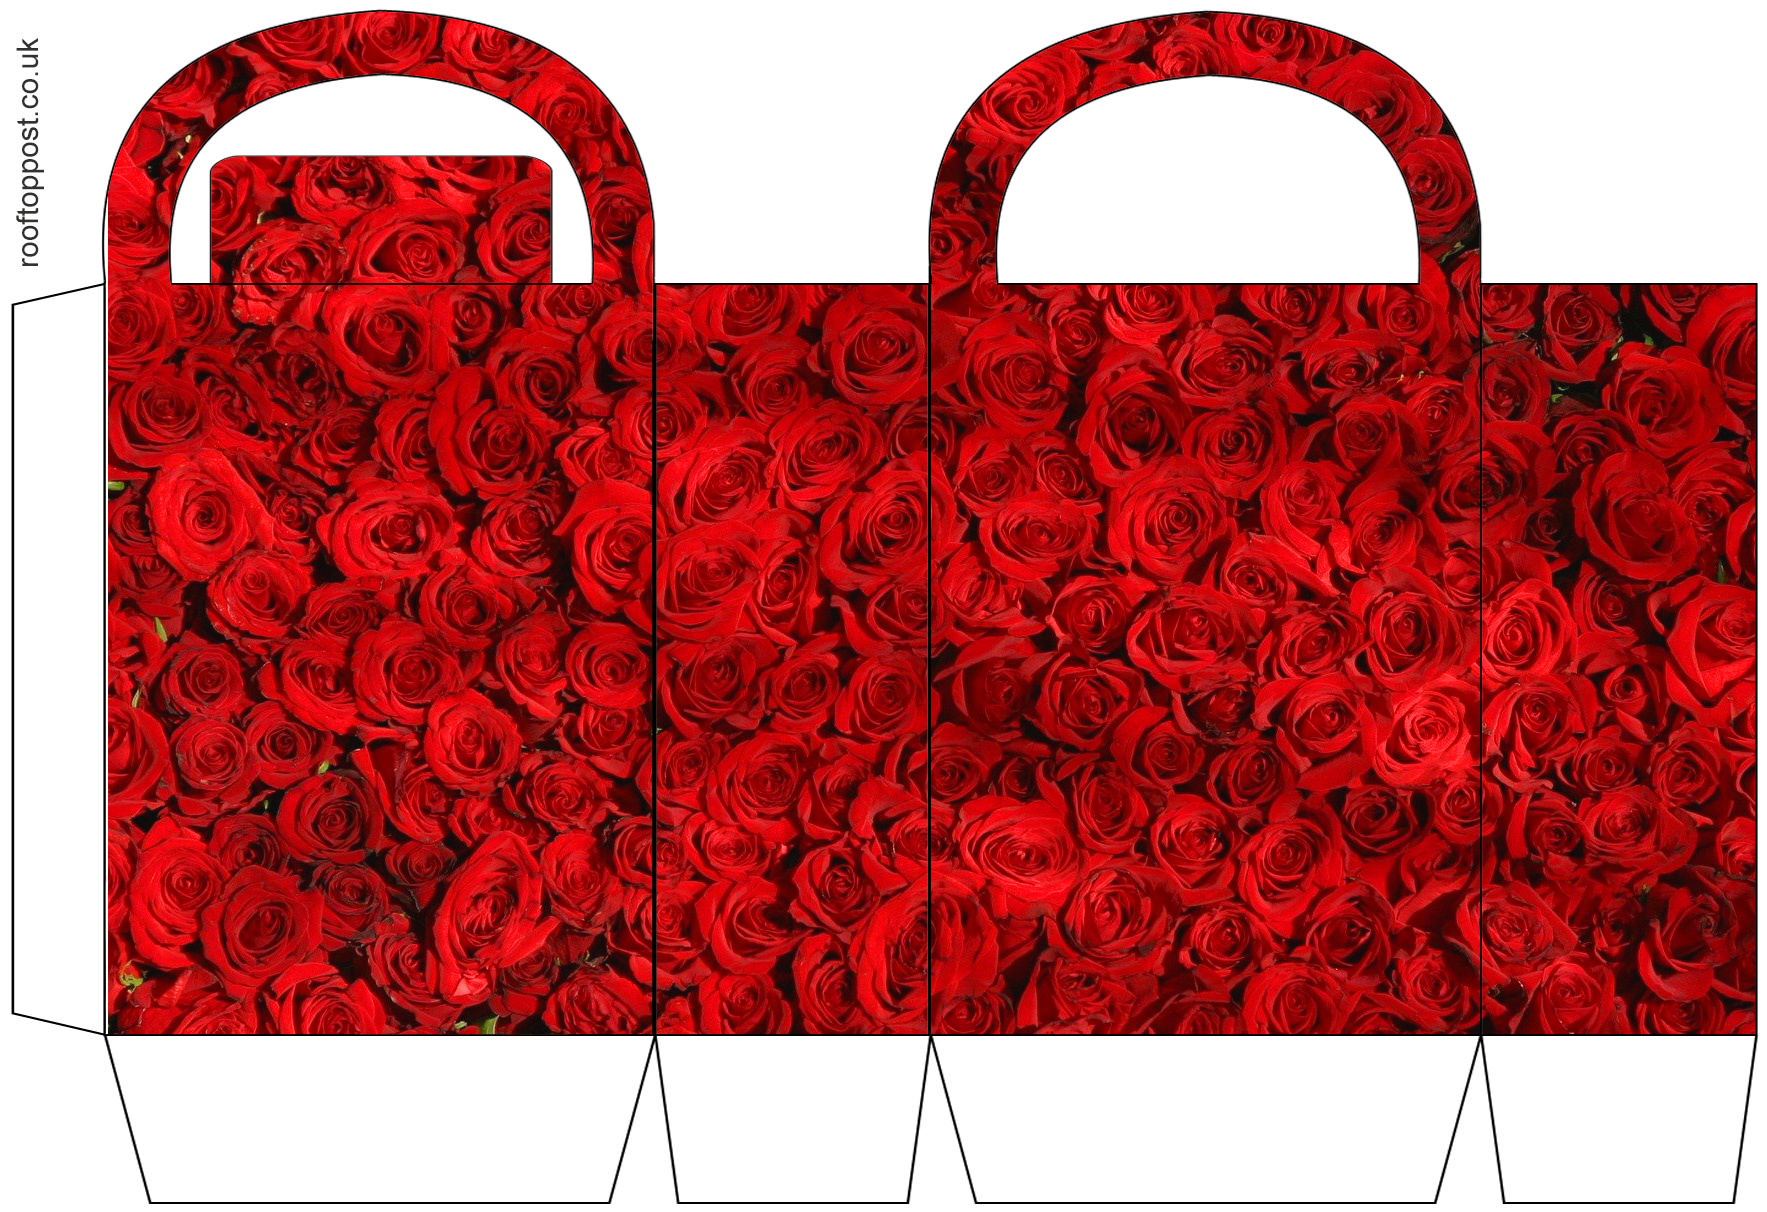 Printable red roses gift bag. Useful for parties, weddings, birthdays and Valentine's Day.